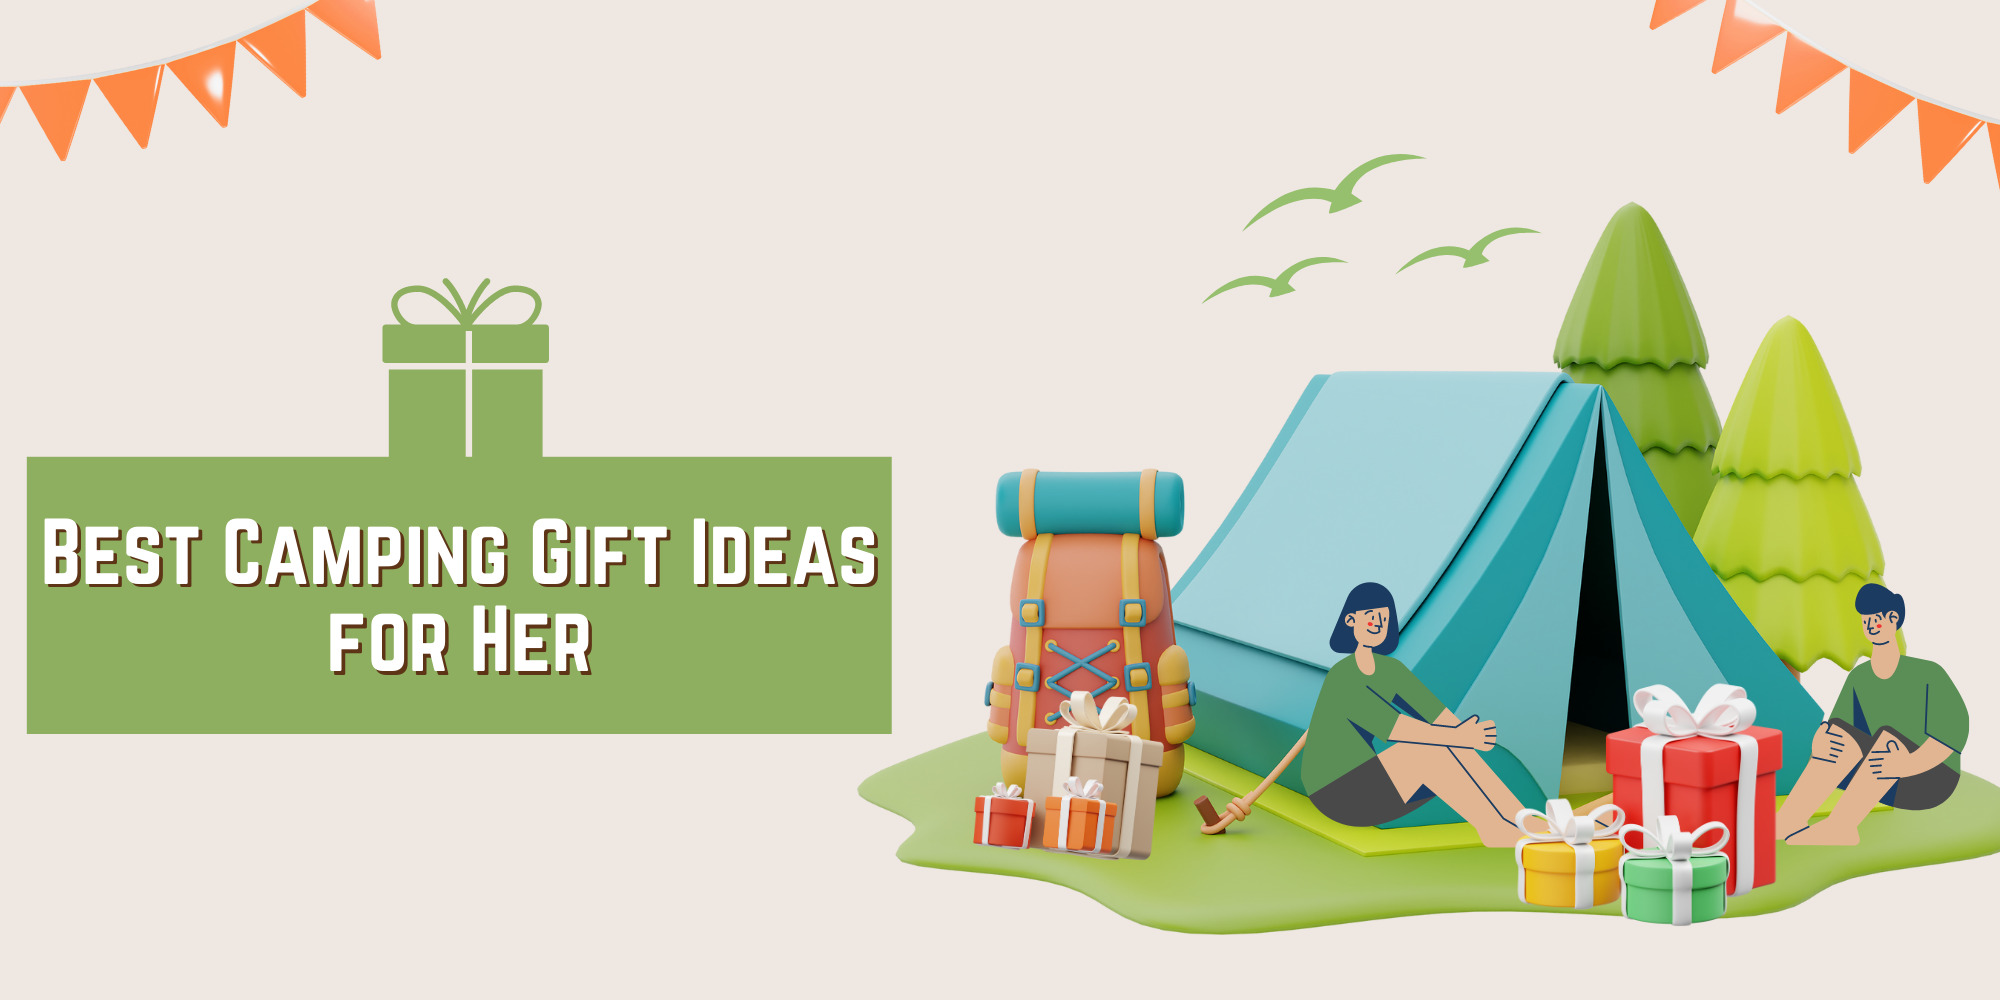 Camping Gift Ideas for Her